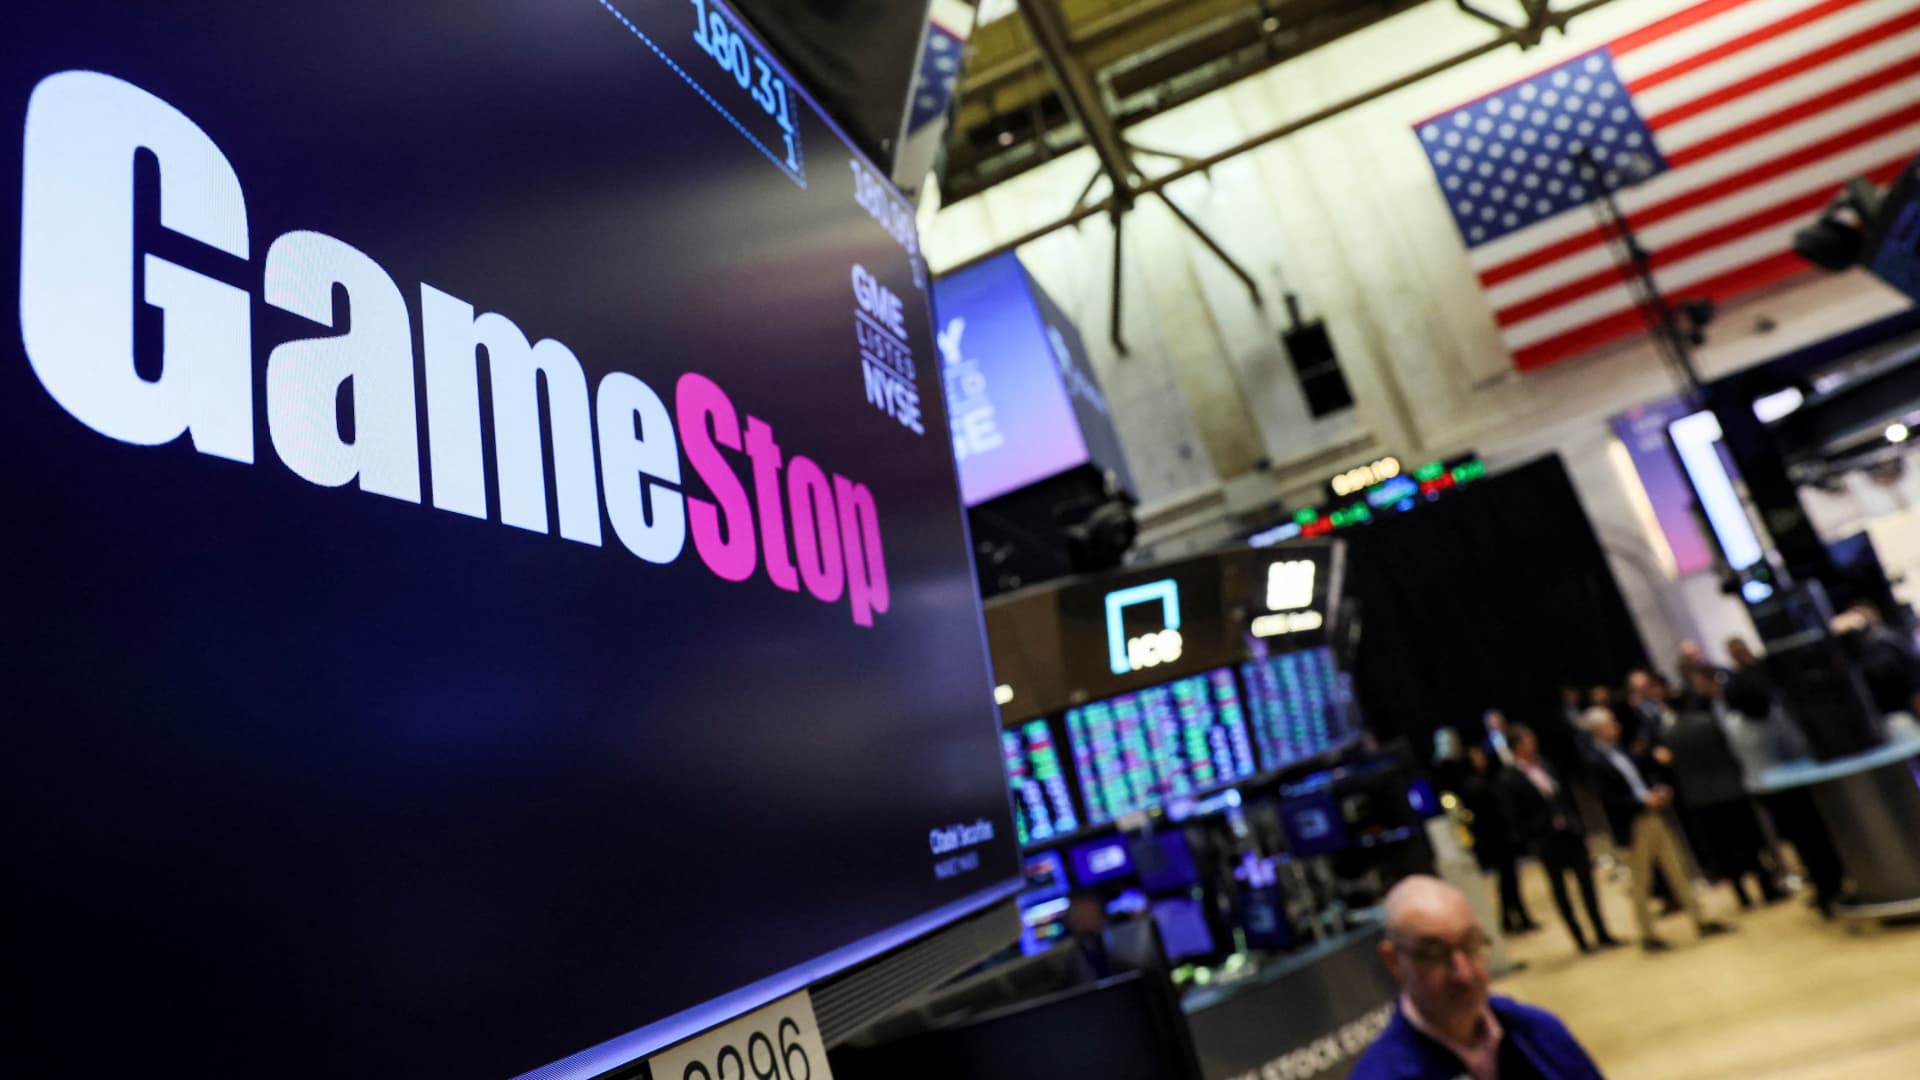 GameStop fires its CFO and announces layoffs as part of aggressive turnaround plan – CNBC